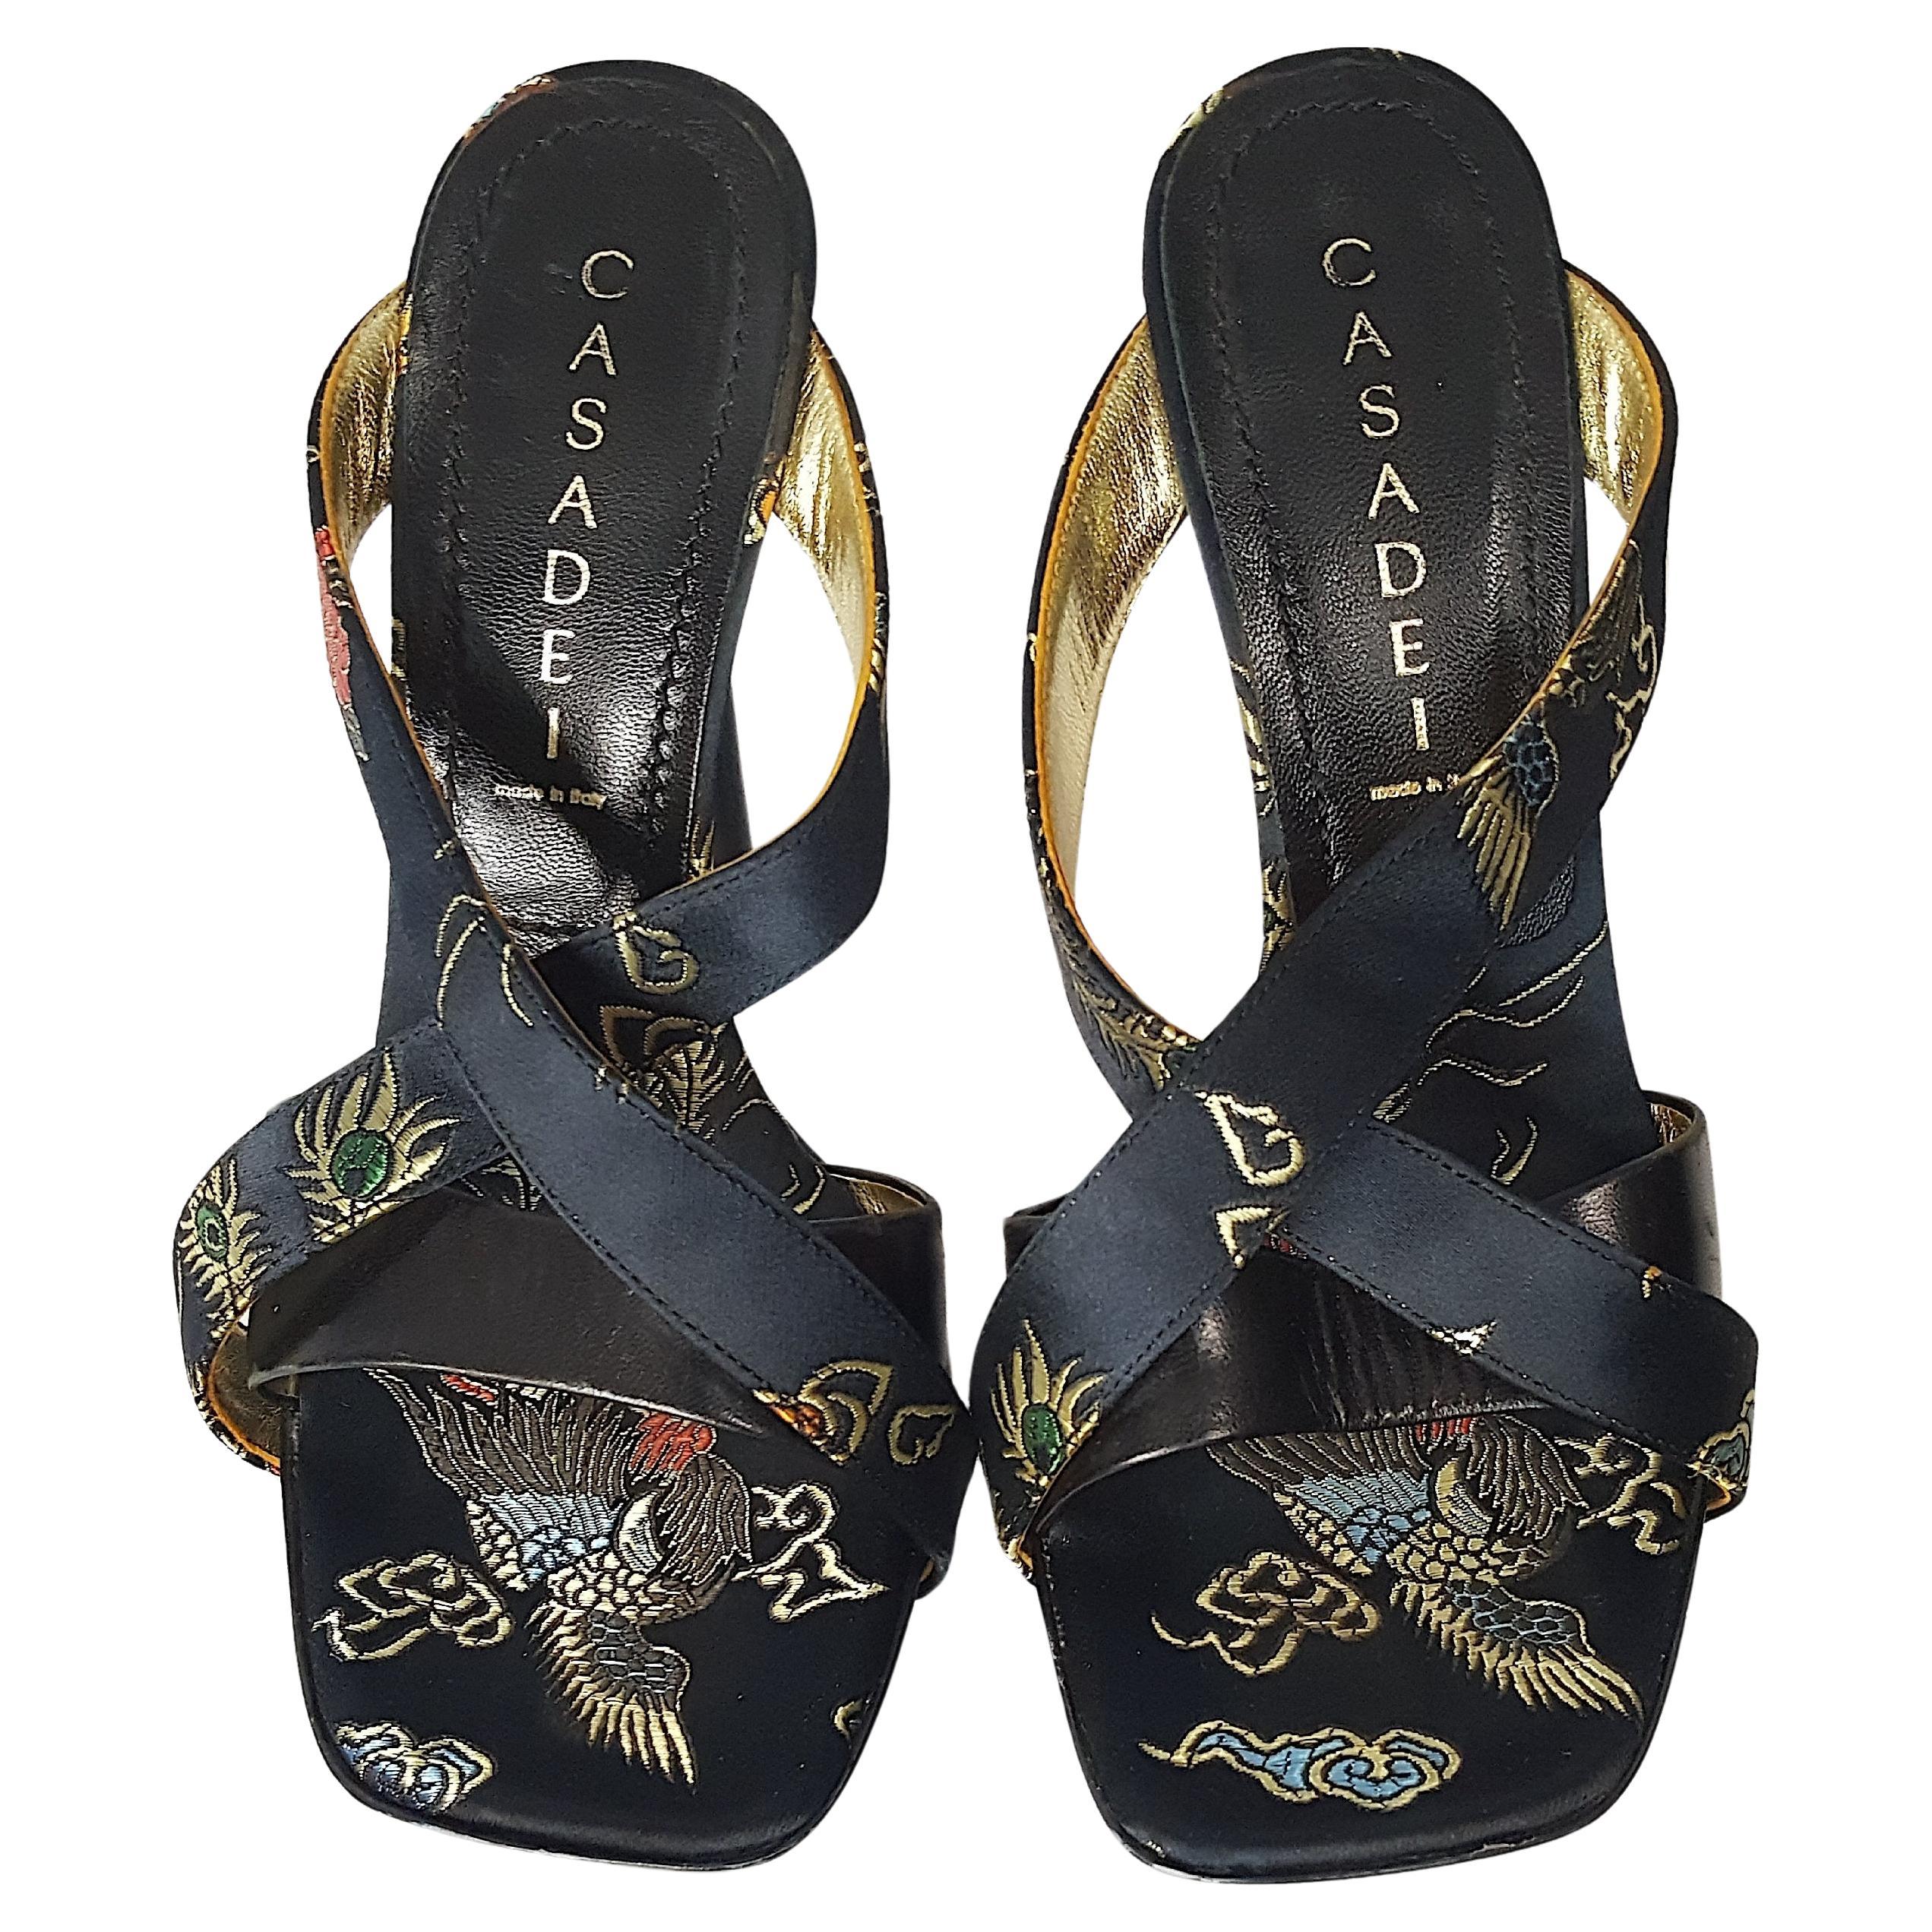 These Casadei limited-edition black patent-leather, calf-leather and ornamental-Chinoiserie metallic-embroidered satin-bound peek-toe sandal mules with towering five-inch heels are supported by a unique platform with cut-out sides, which pay homage